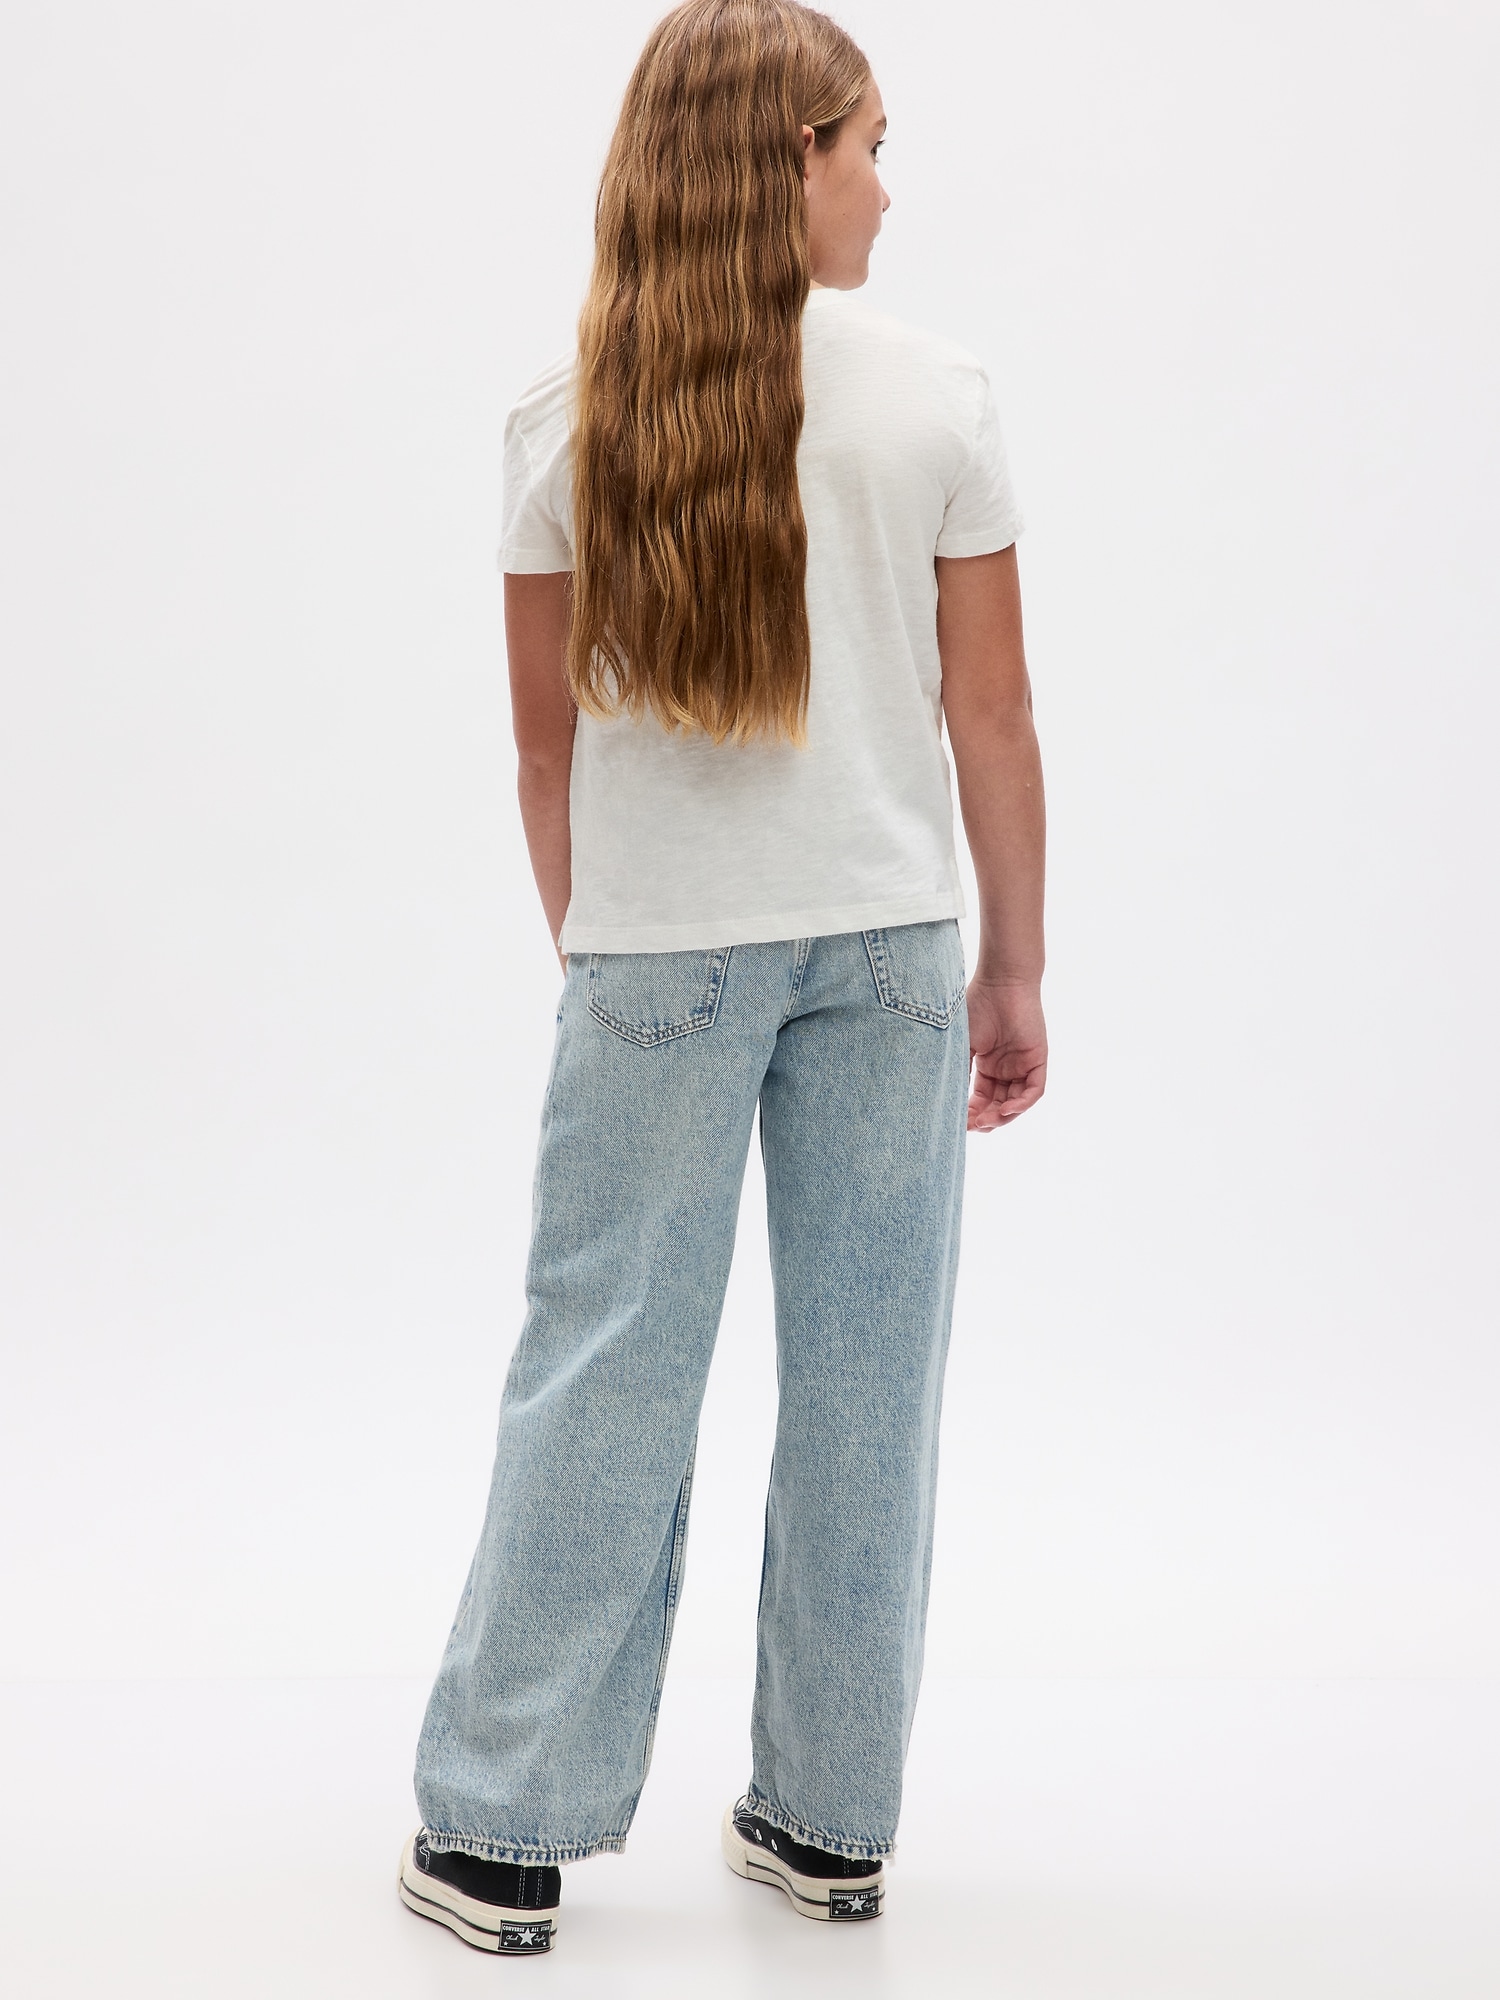 Kids Low Stride Relaxed Jeans | Gap